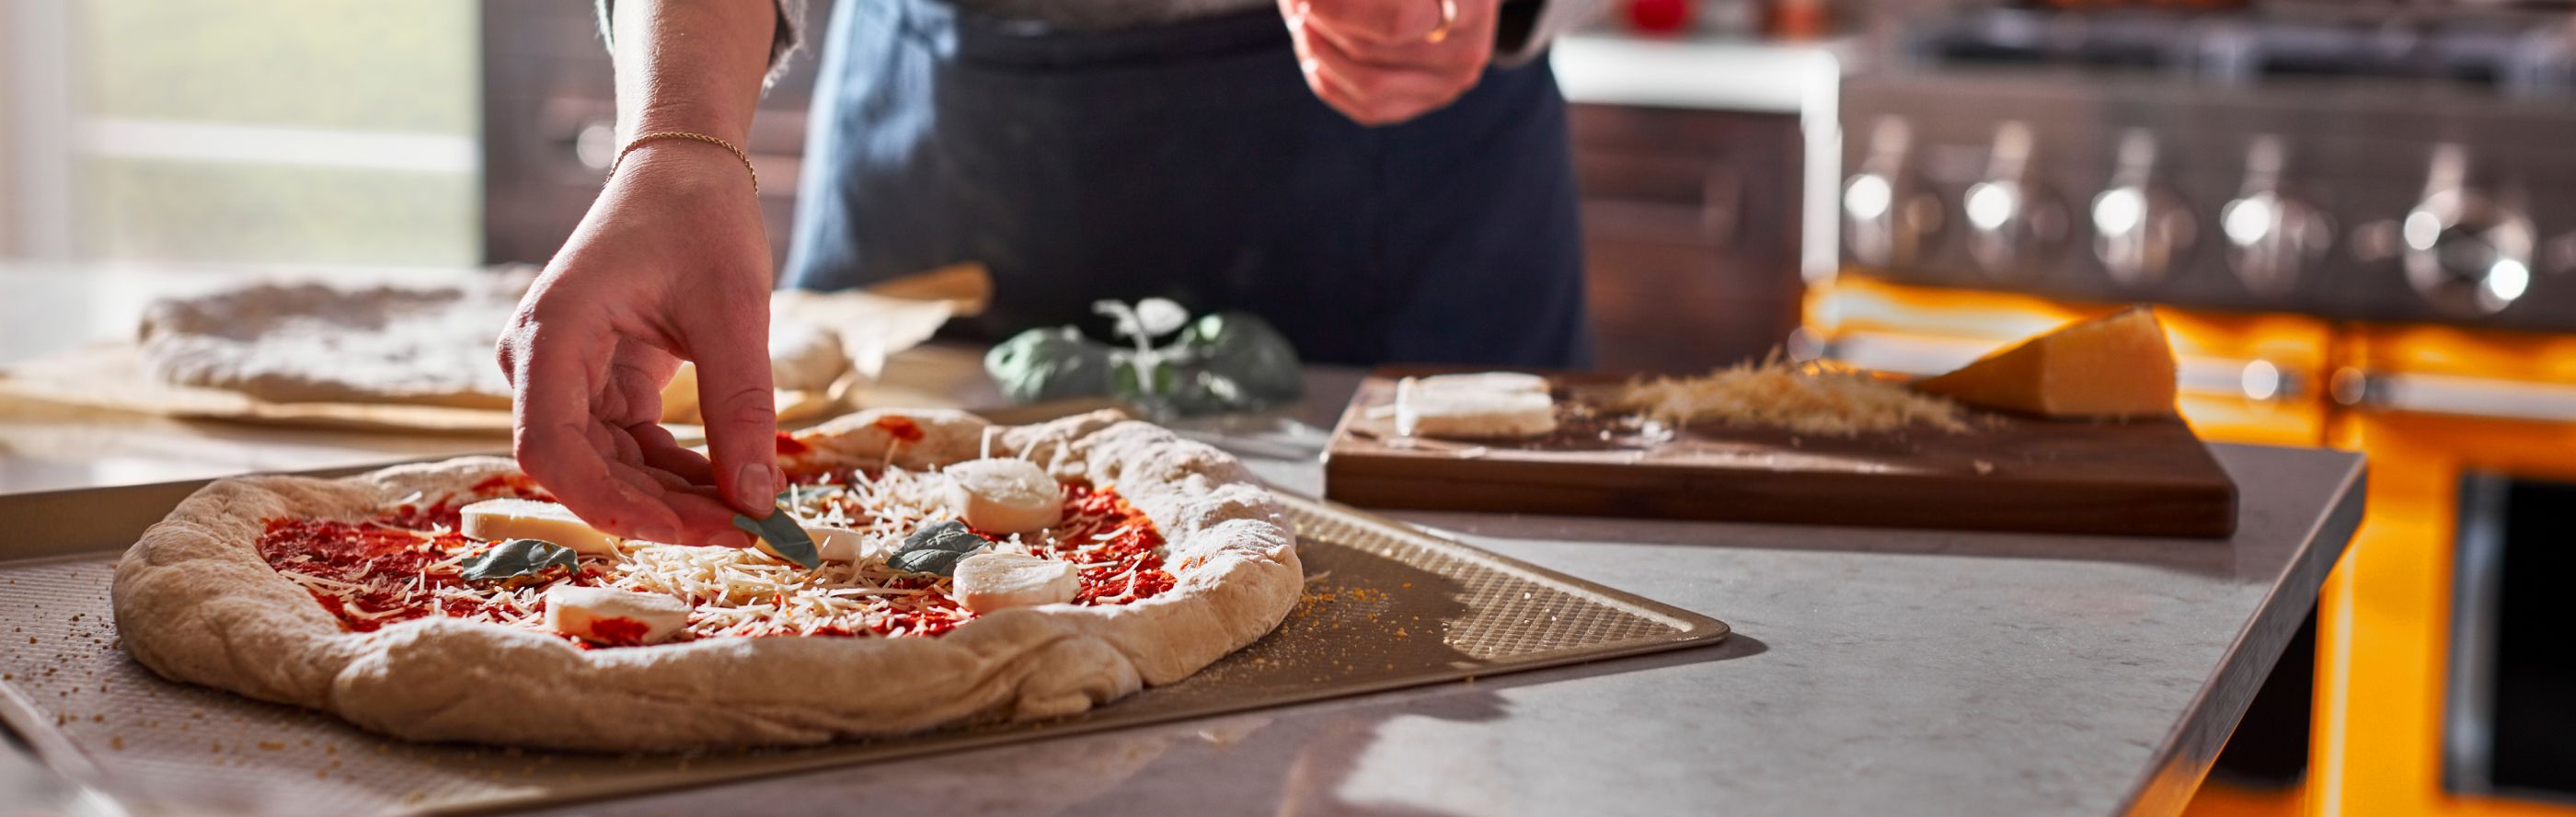 Person adding toppings to homemade pizza dough